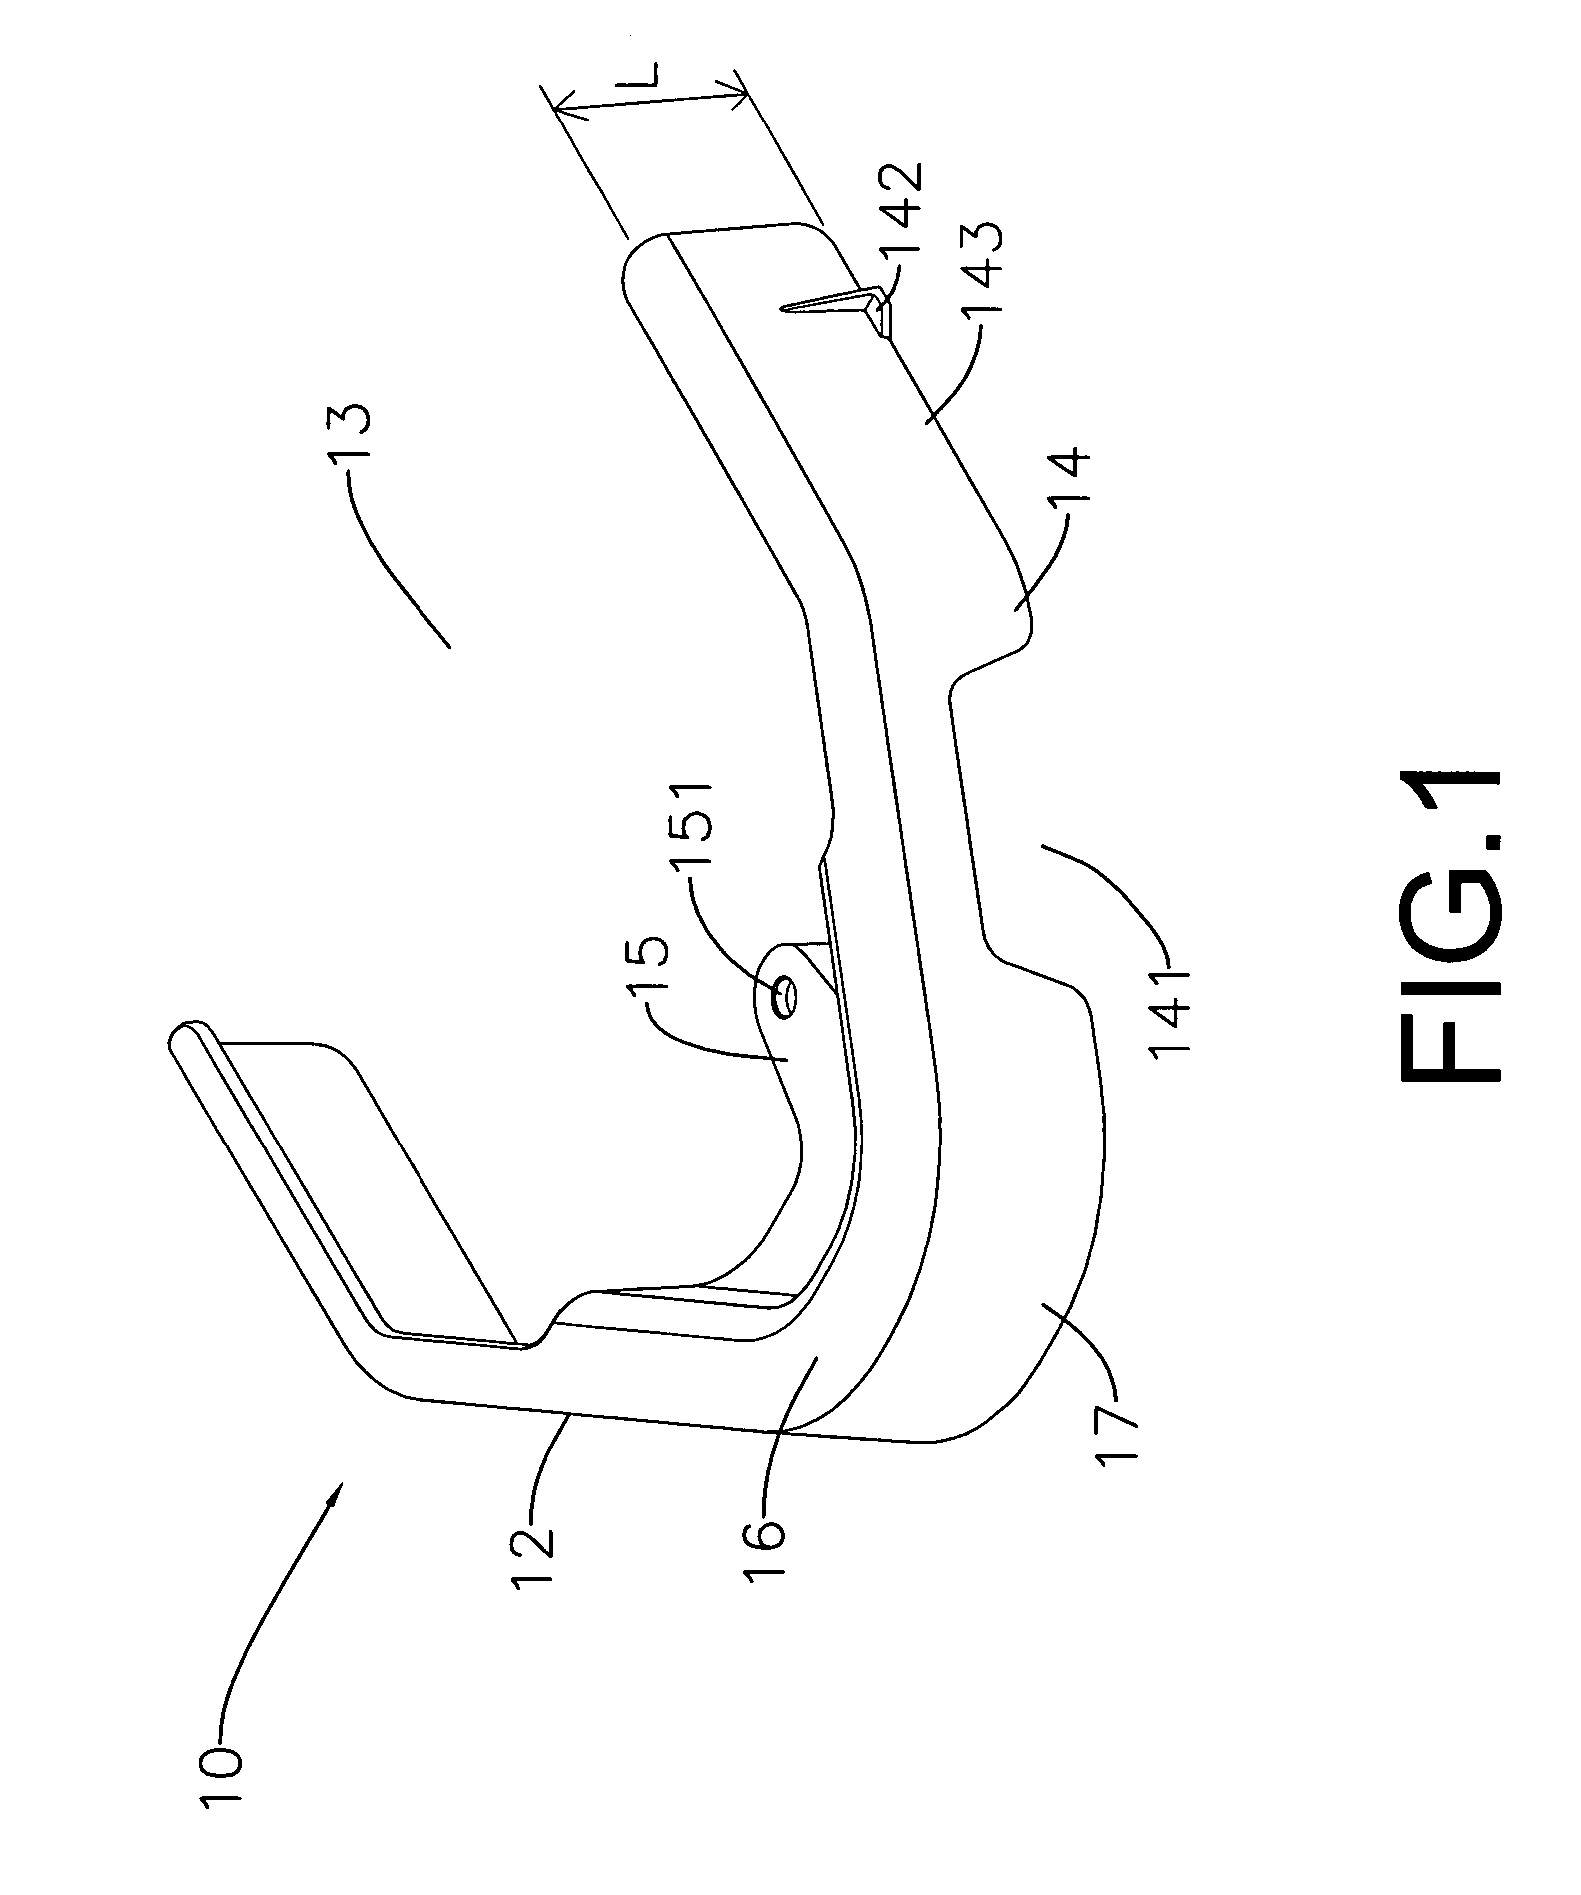 Air flow diversion device for dissipating heat from electronic components